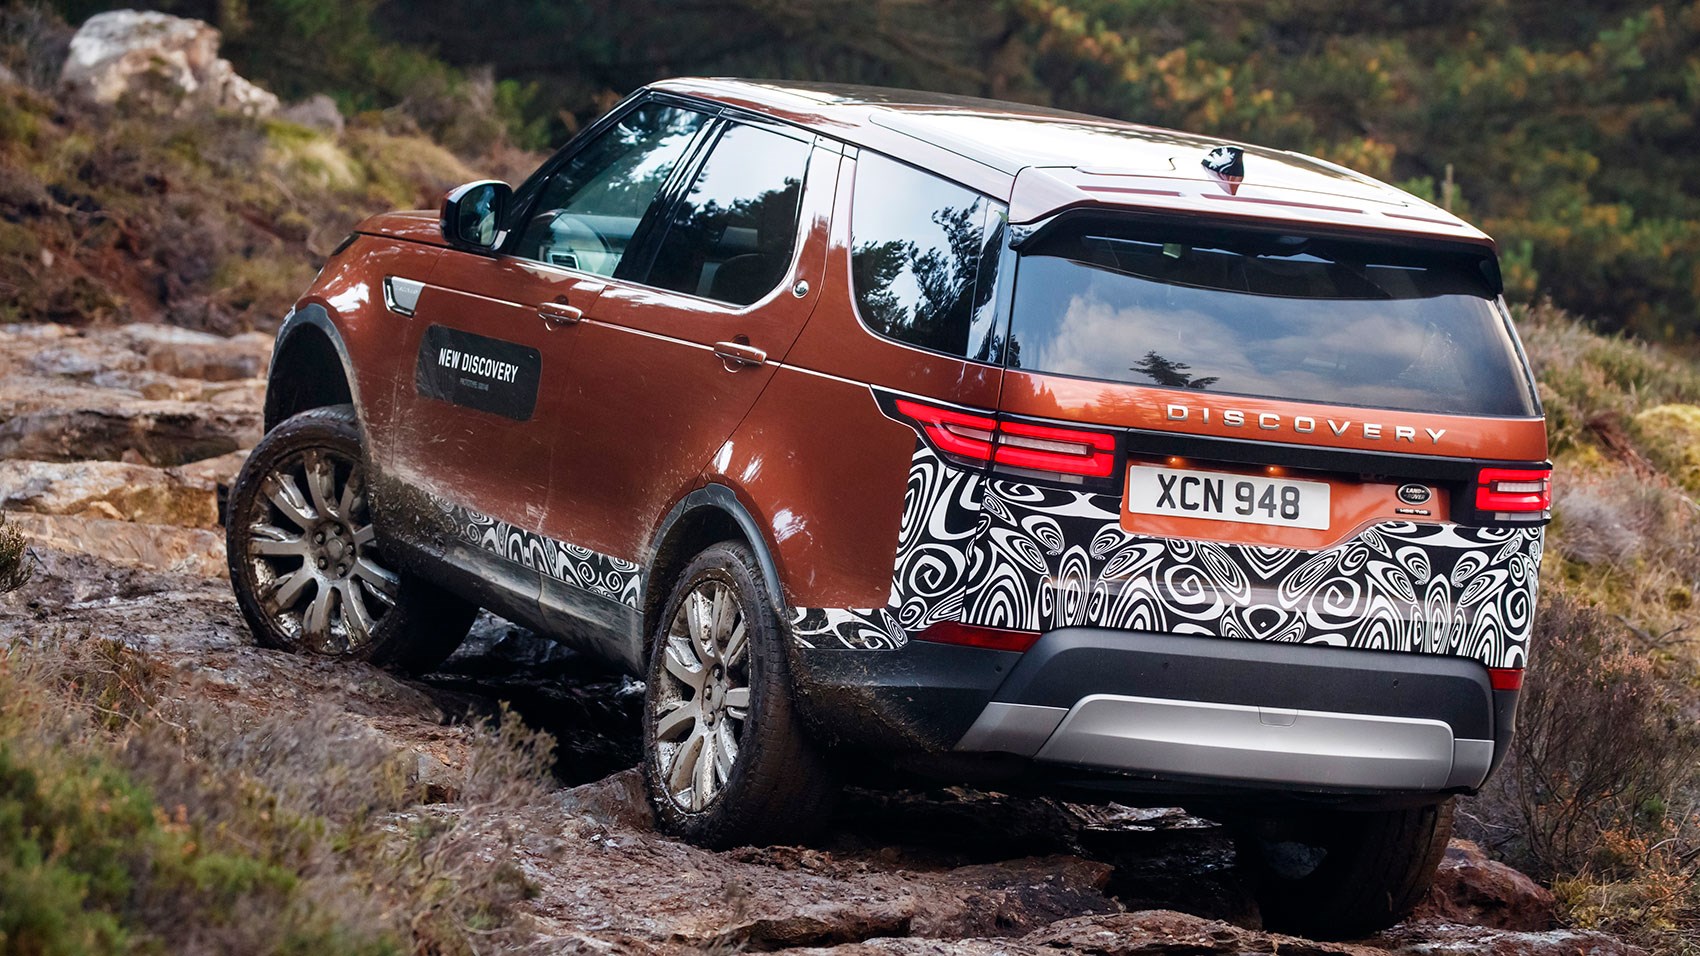 Ровер дискавери 2017. Land Rover Discovery 5. Ленд Ровер Дискавери 2017. Ленд Ровер Дискавери 5 поколения. Land Rover Discovery 5 Offroad.